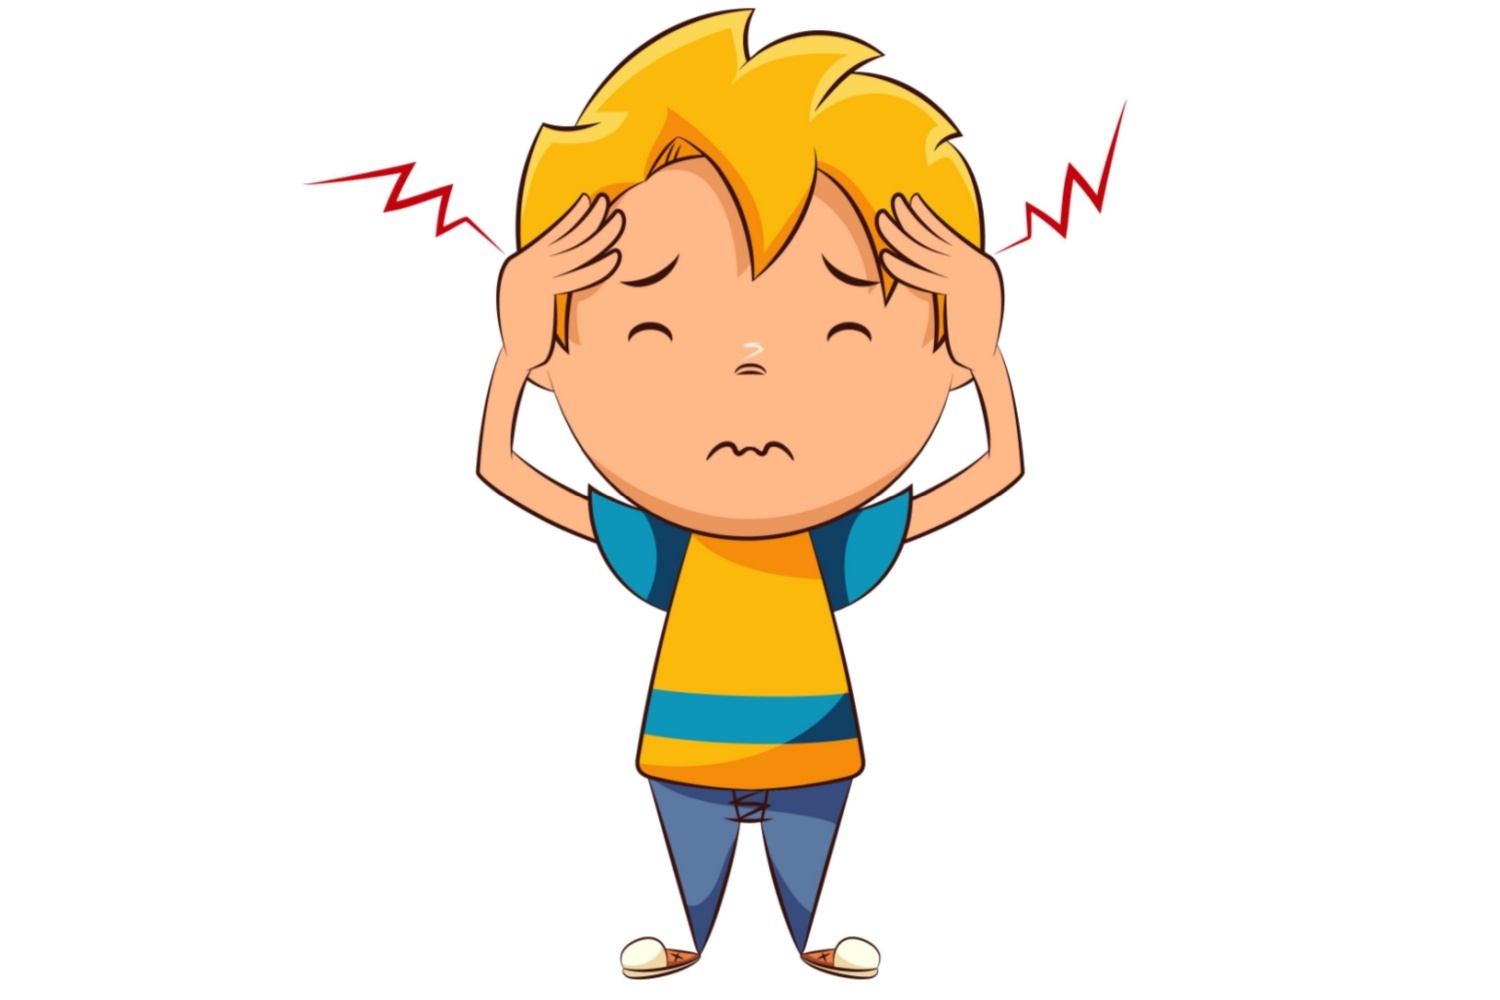 Symptoms of Headaches in Toddlers